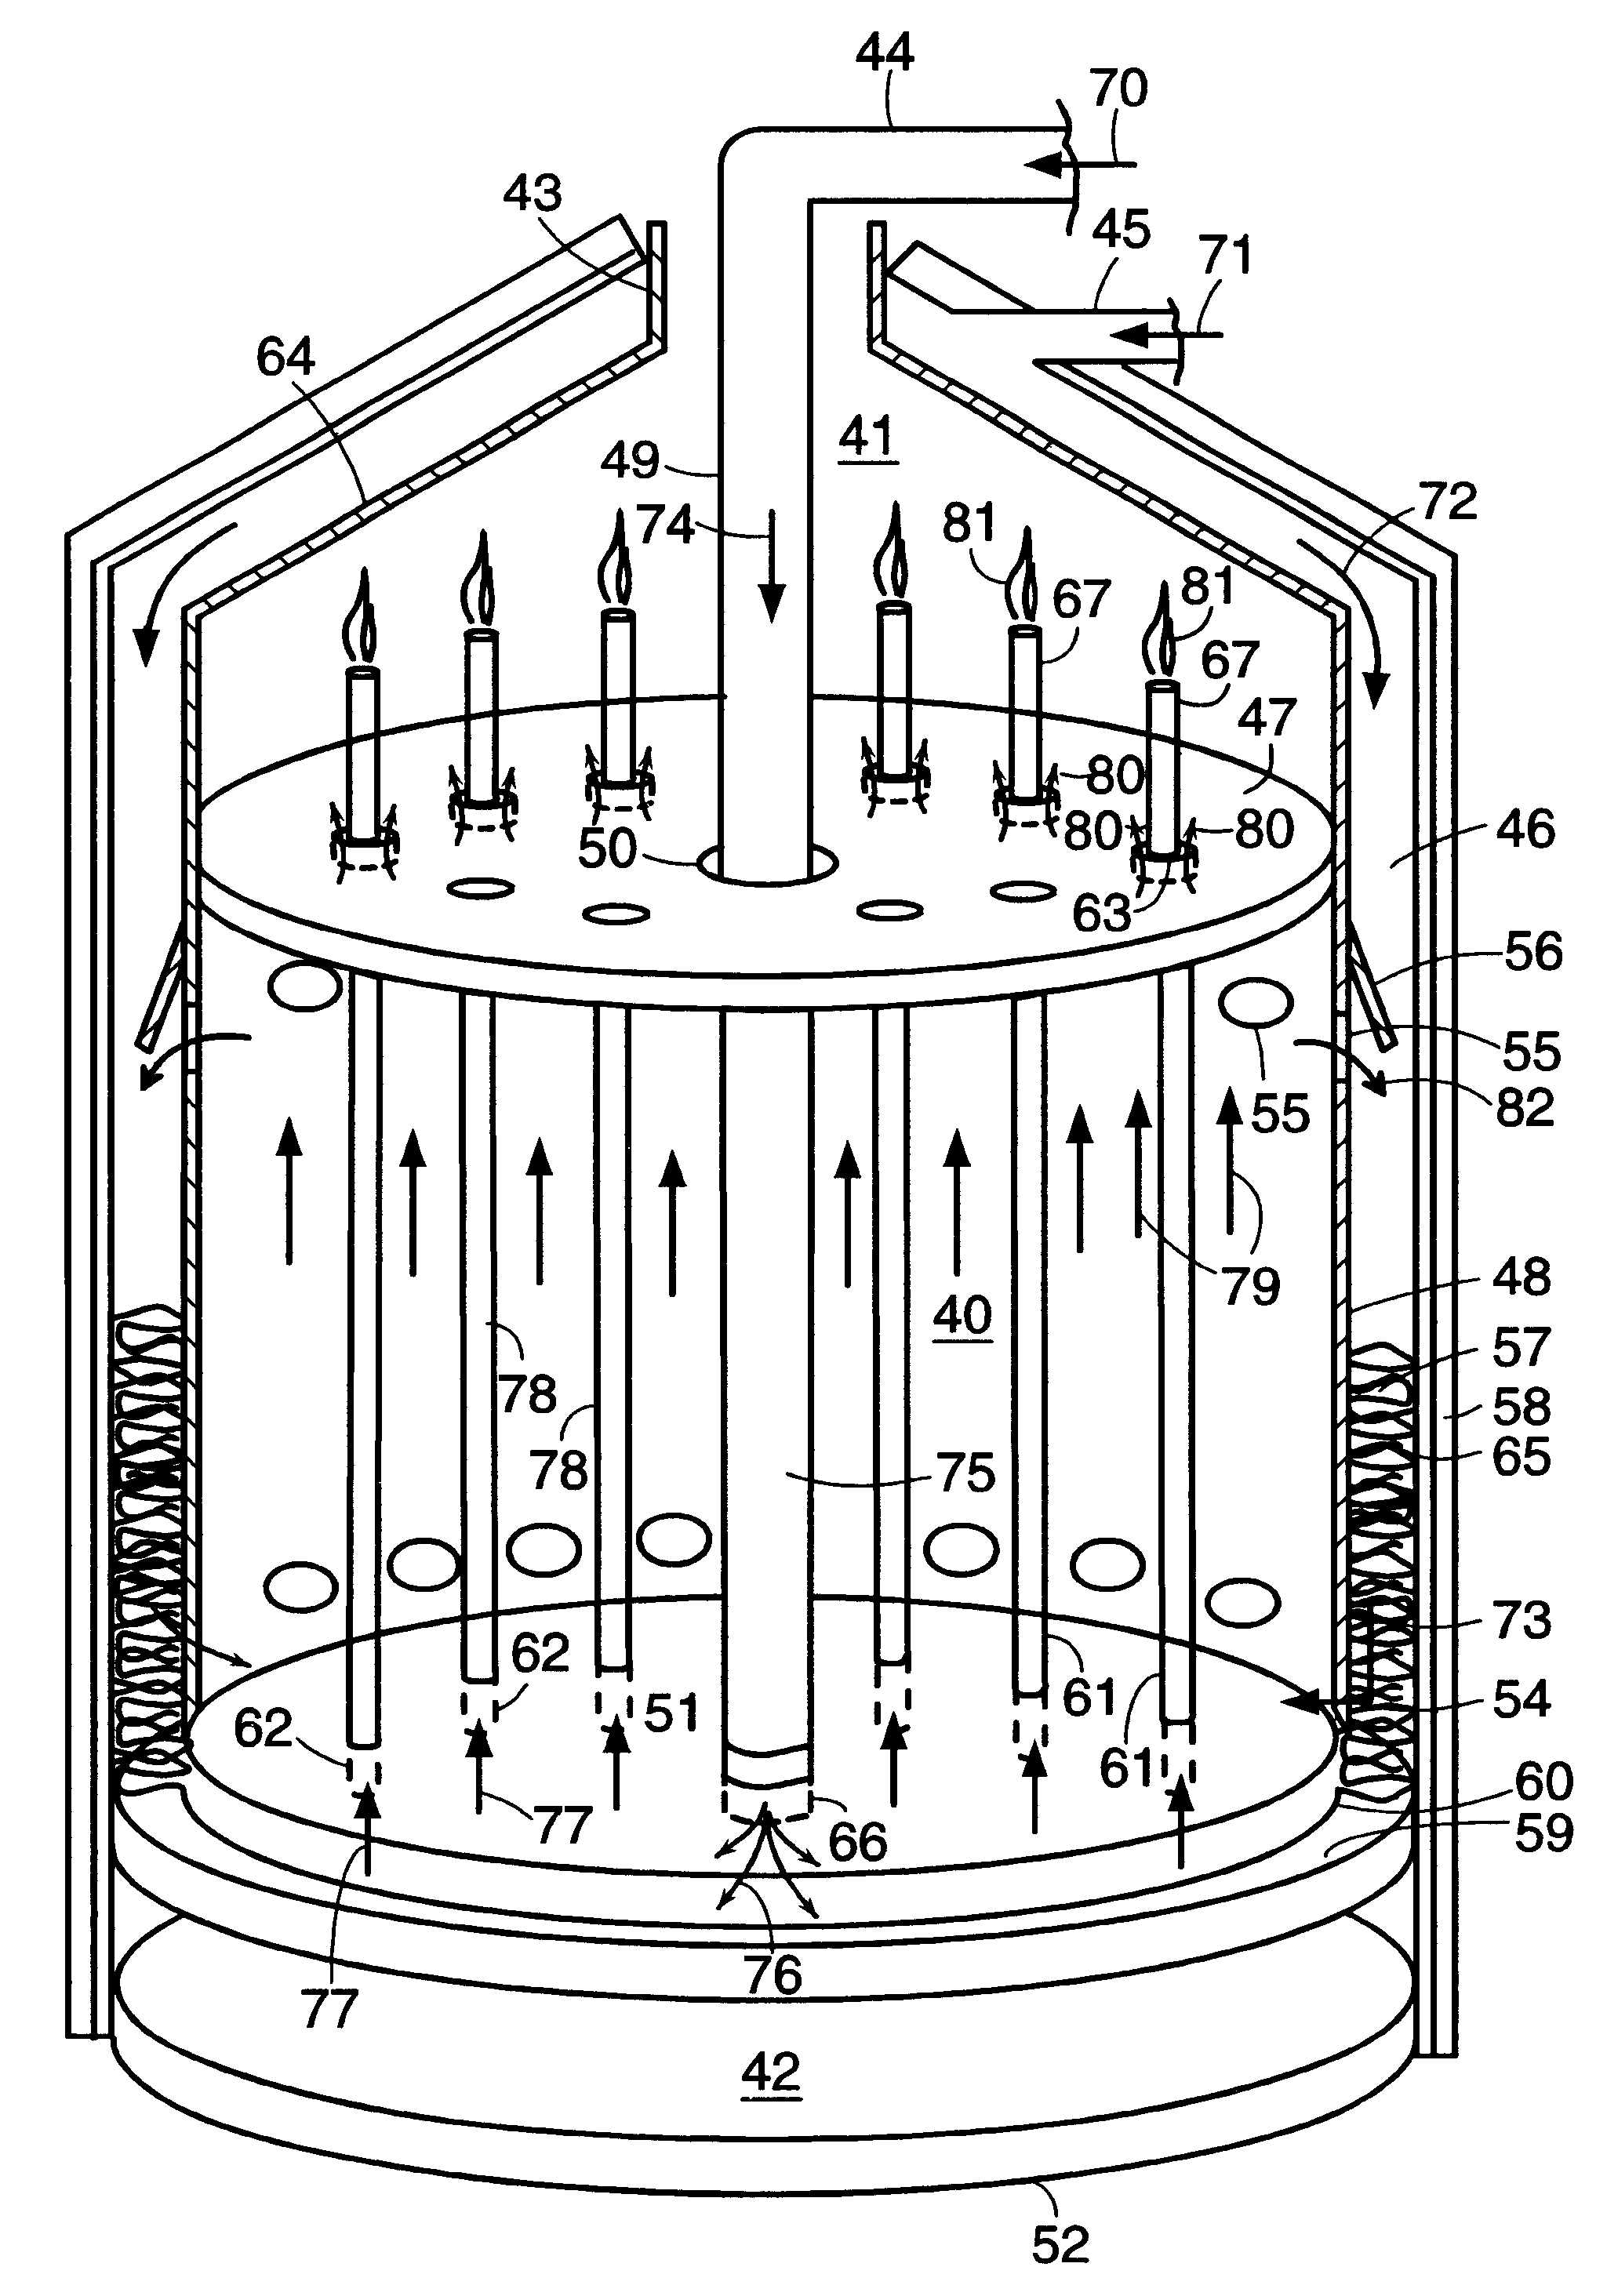 Integrated solid oxide fuel cell and reformer